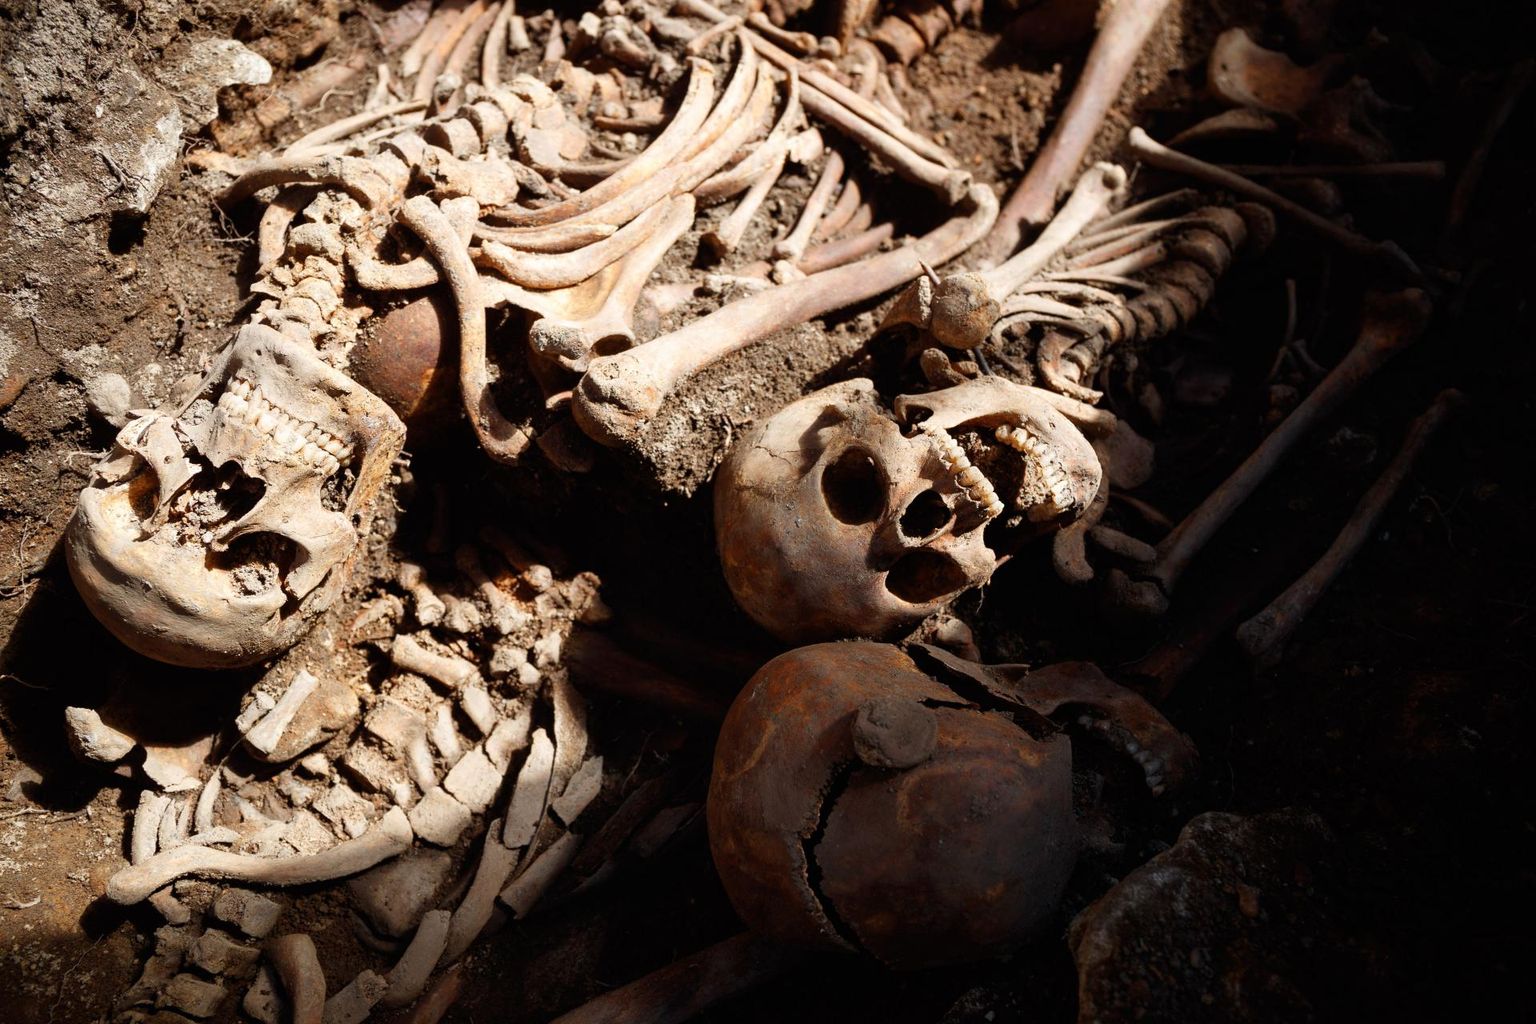 Skeletons next to St. Nicholas Church in the pit of the future water line.